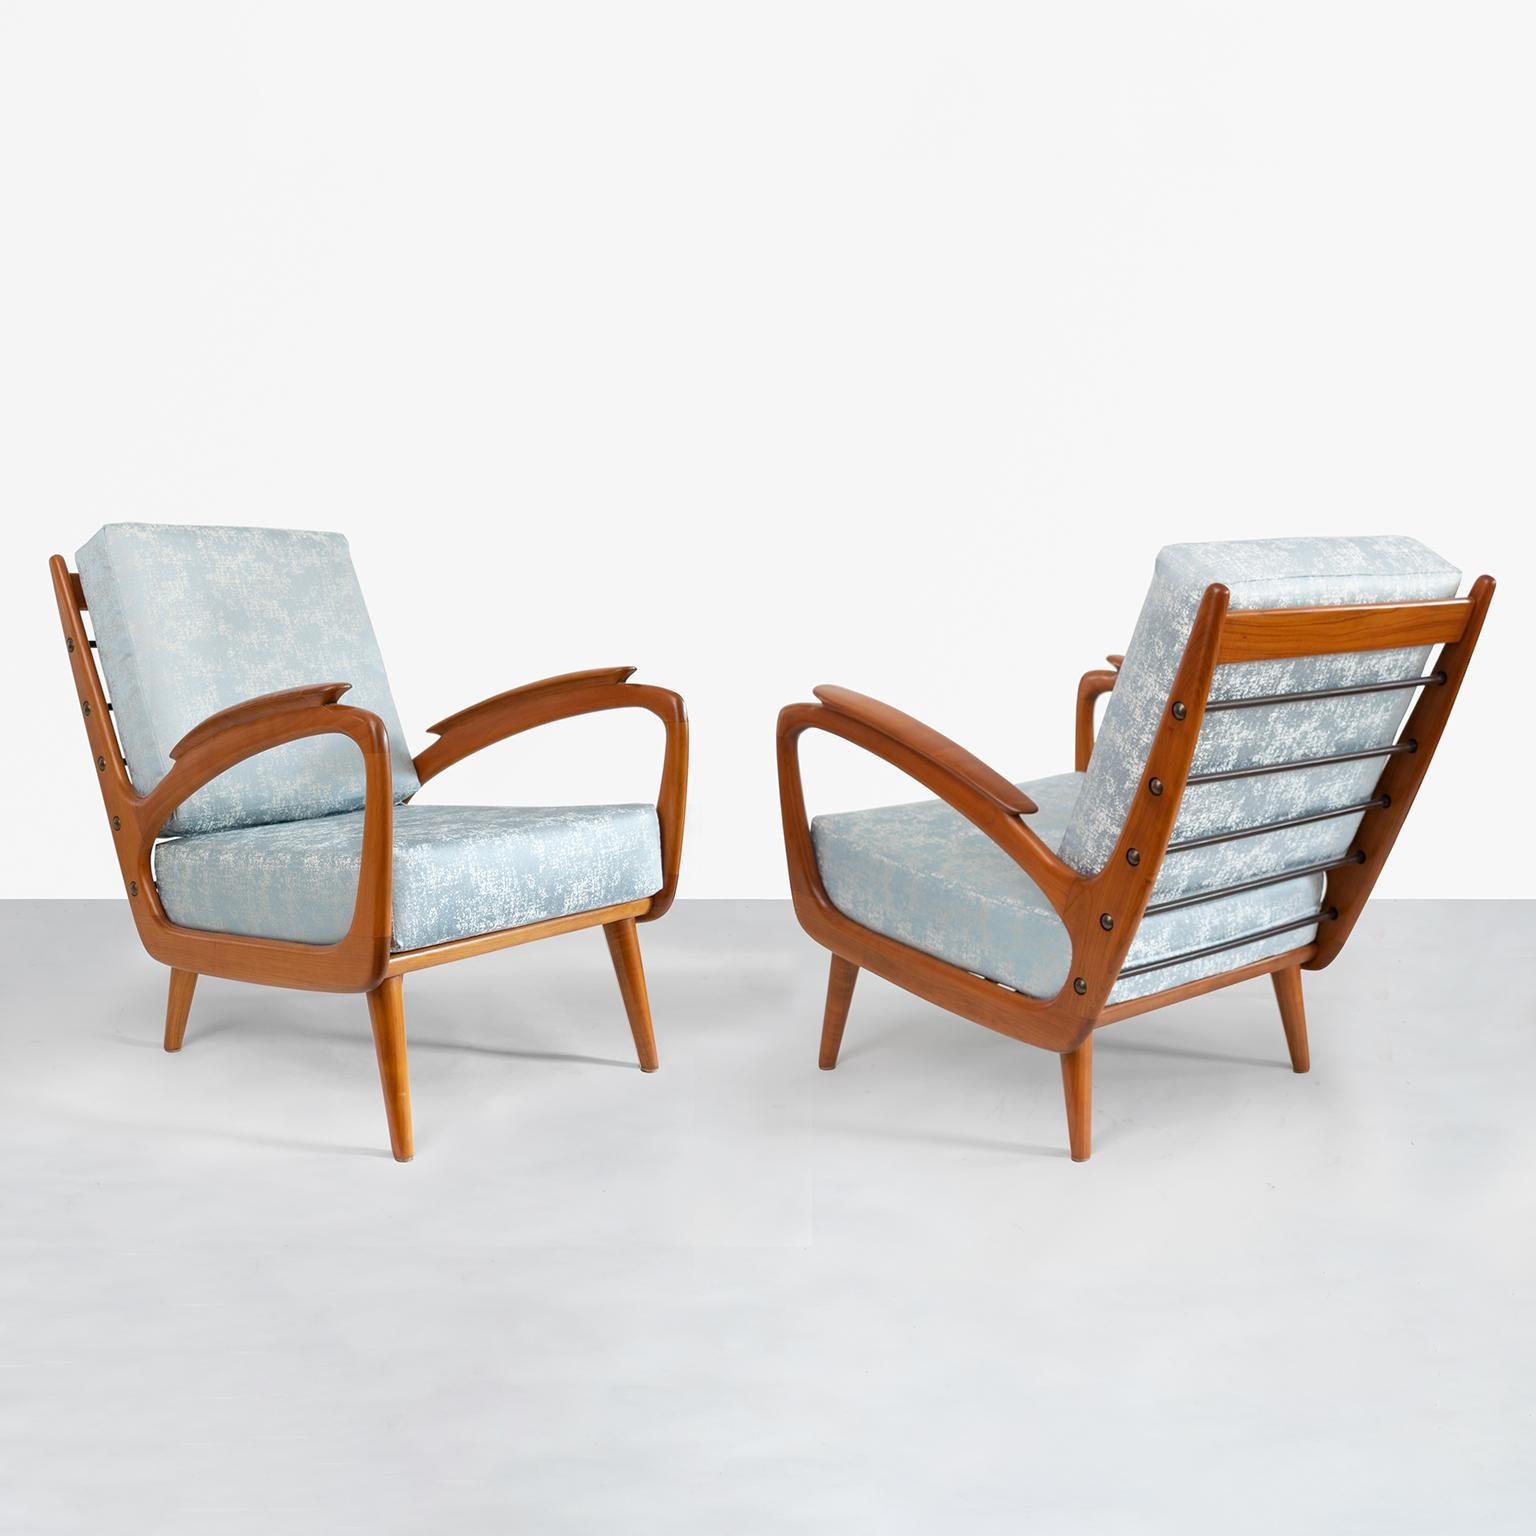 Sleek and dynamic pair of carved cherrywood Mid-Century Modern armchairs from B. Sprij Vlaardingen, Netherlands. The chair’s design plays with negative space and are reminiscent of the works of sculptor Henry Moore. A series of vinyl wrapped coil